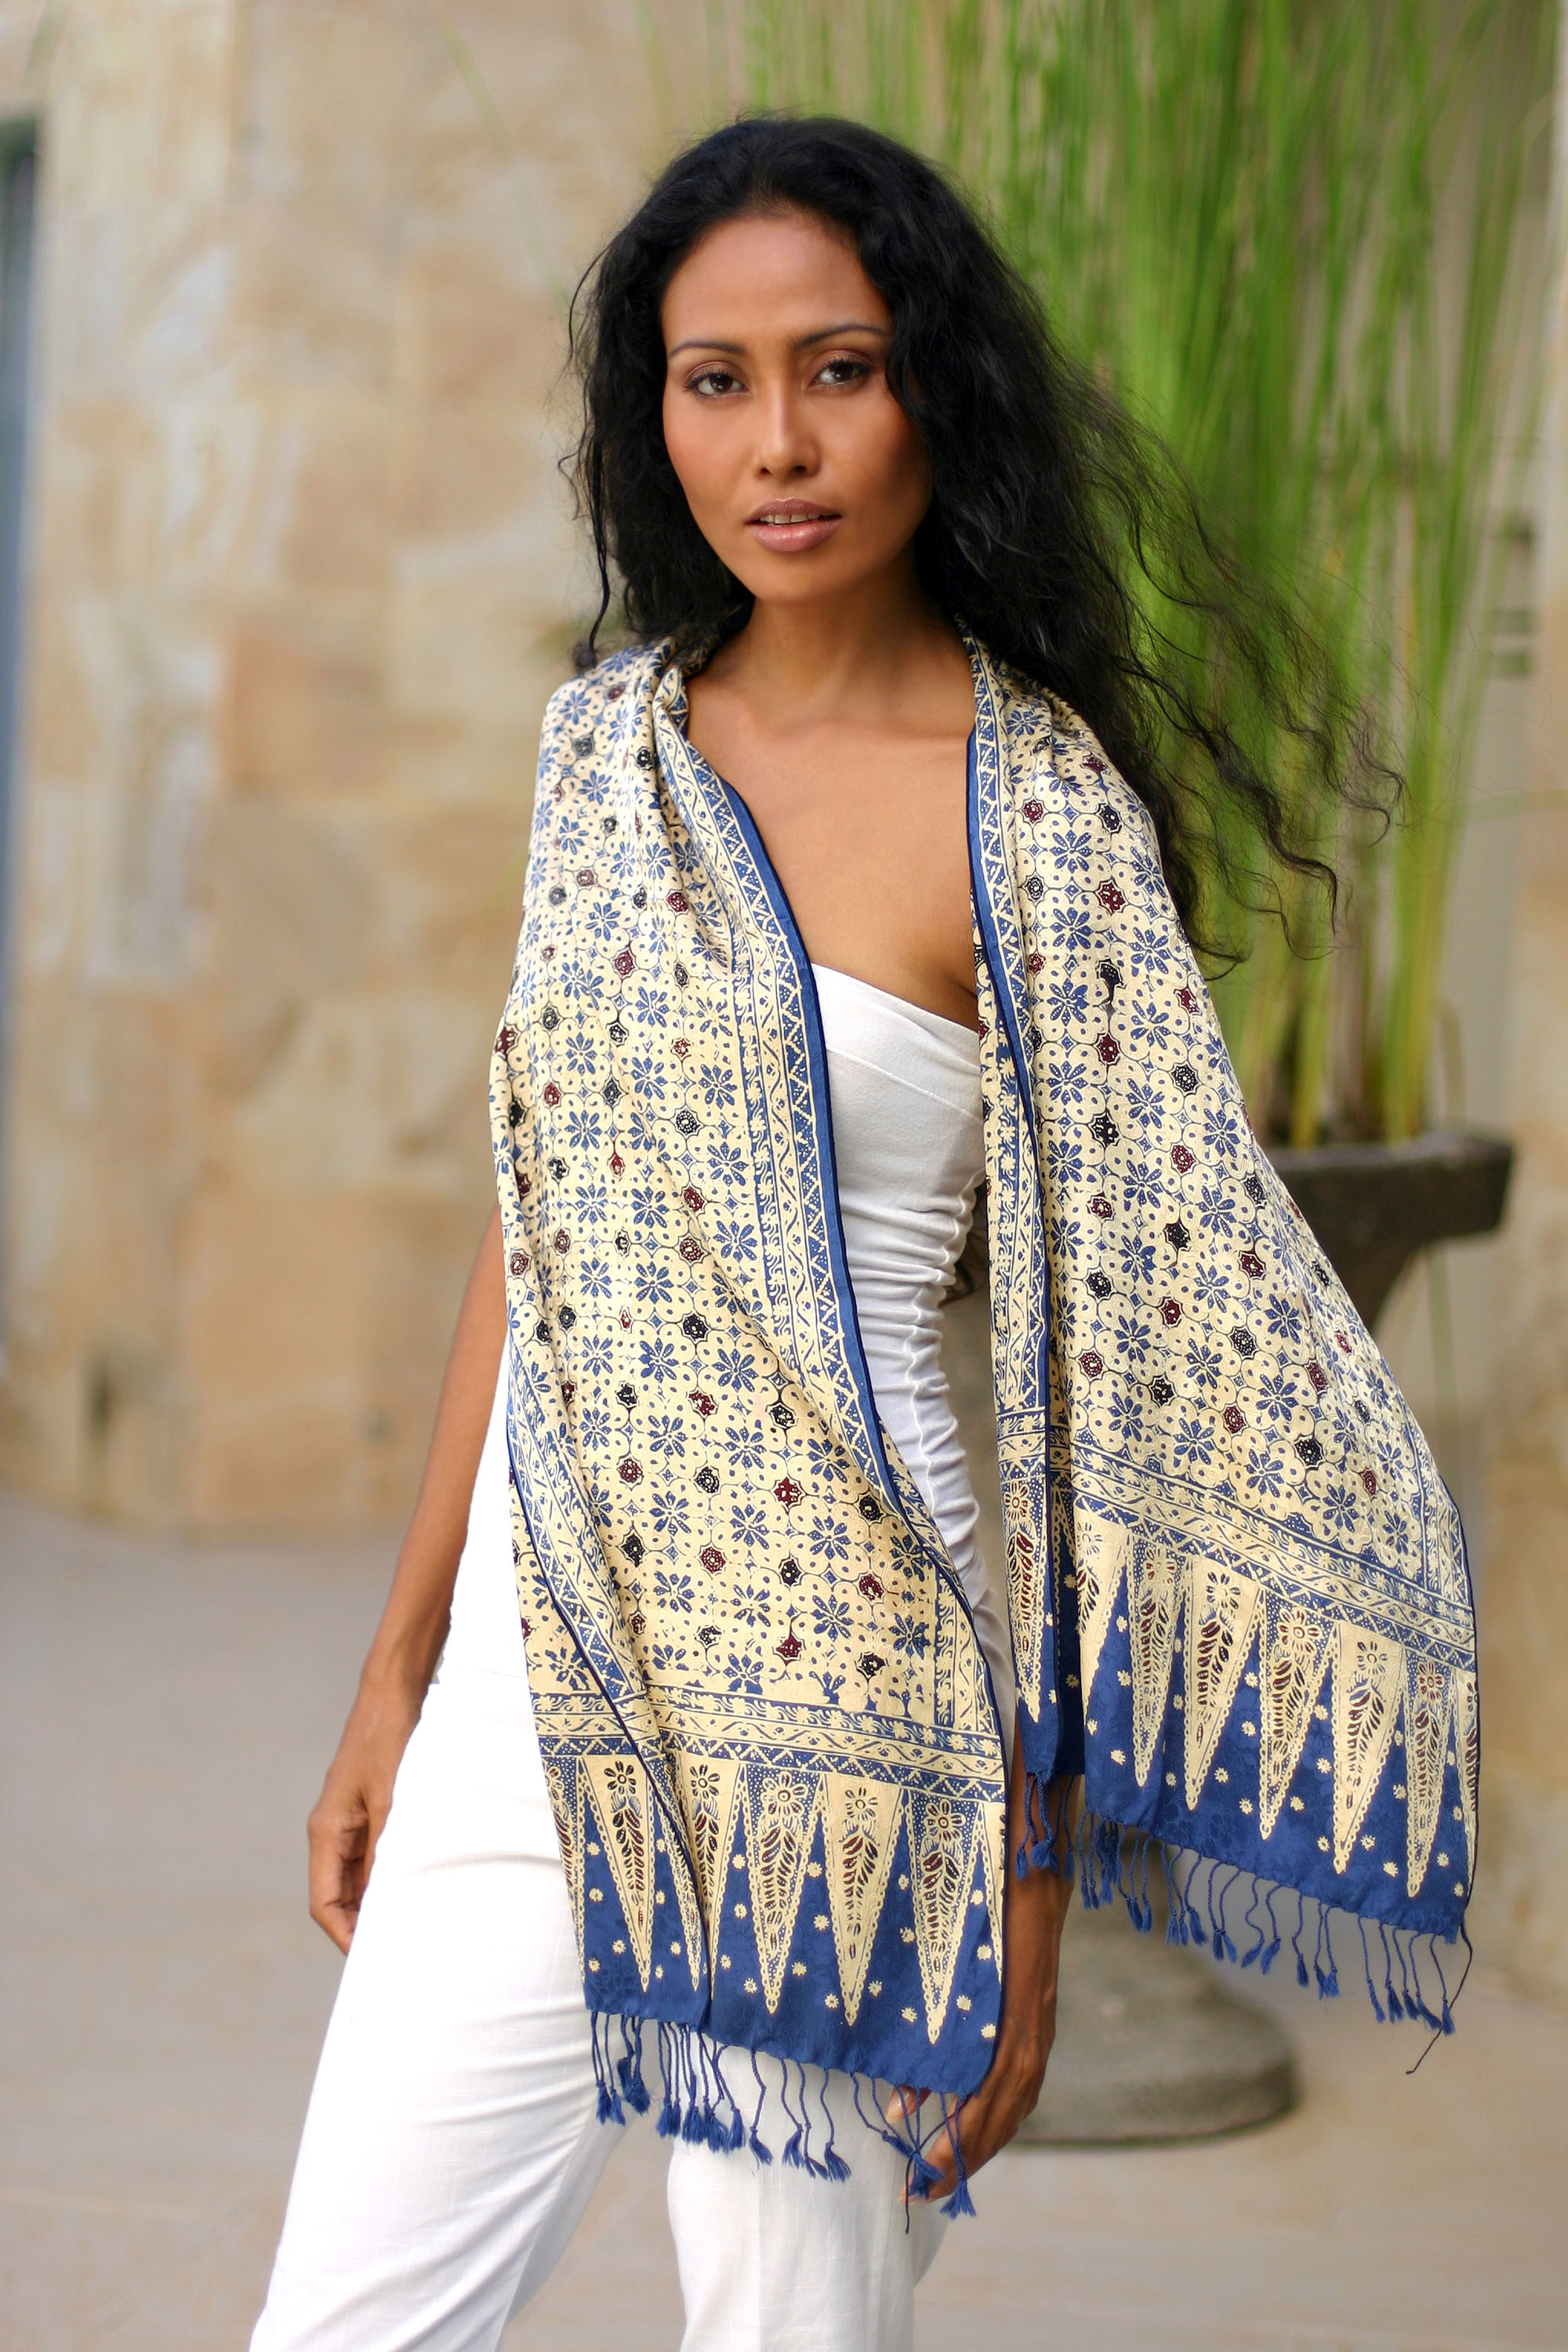 Try These Perfect Scarves and Shawls for Warm Weather